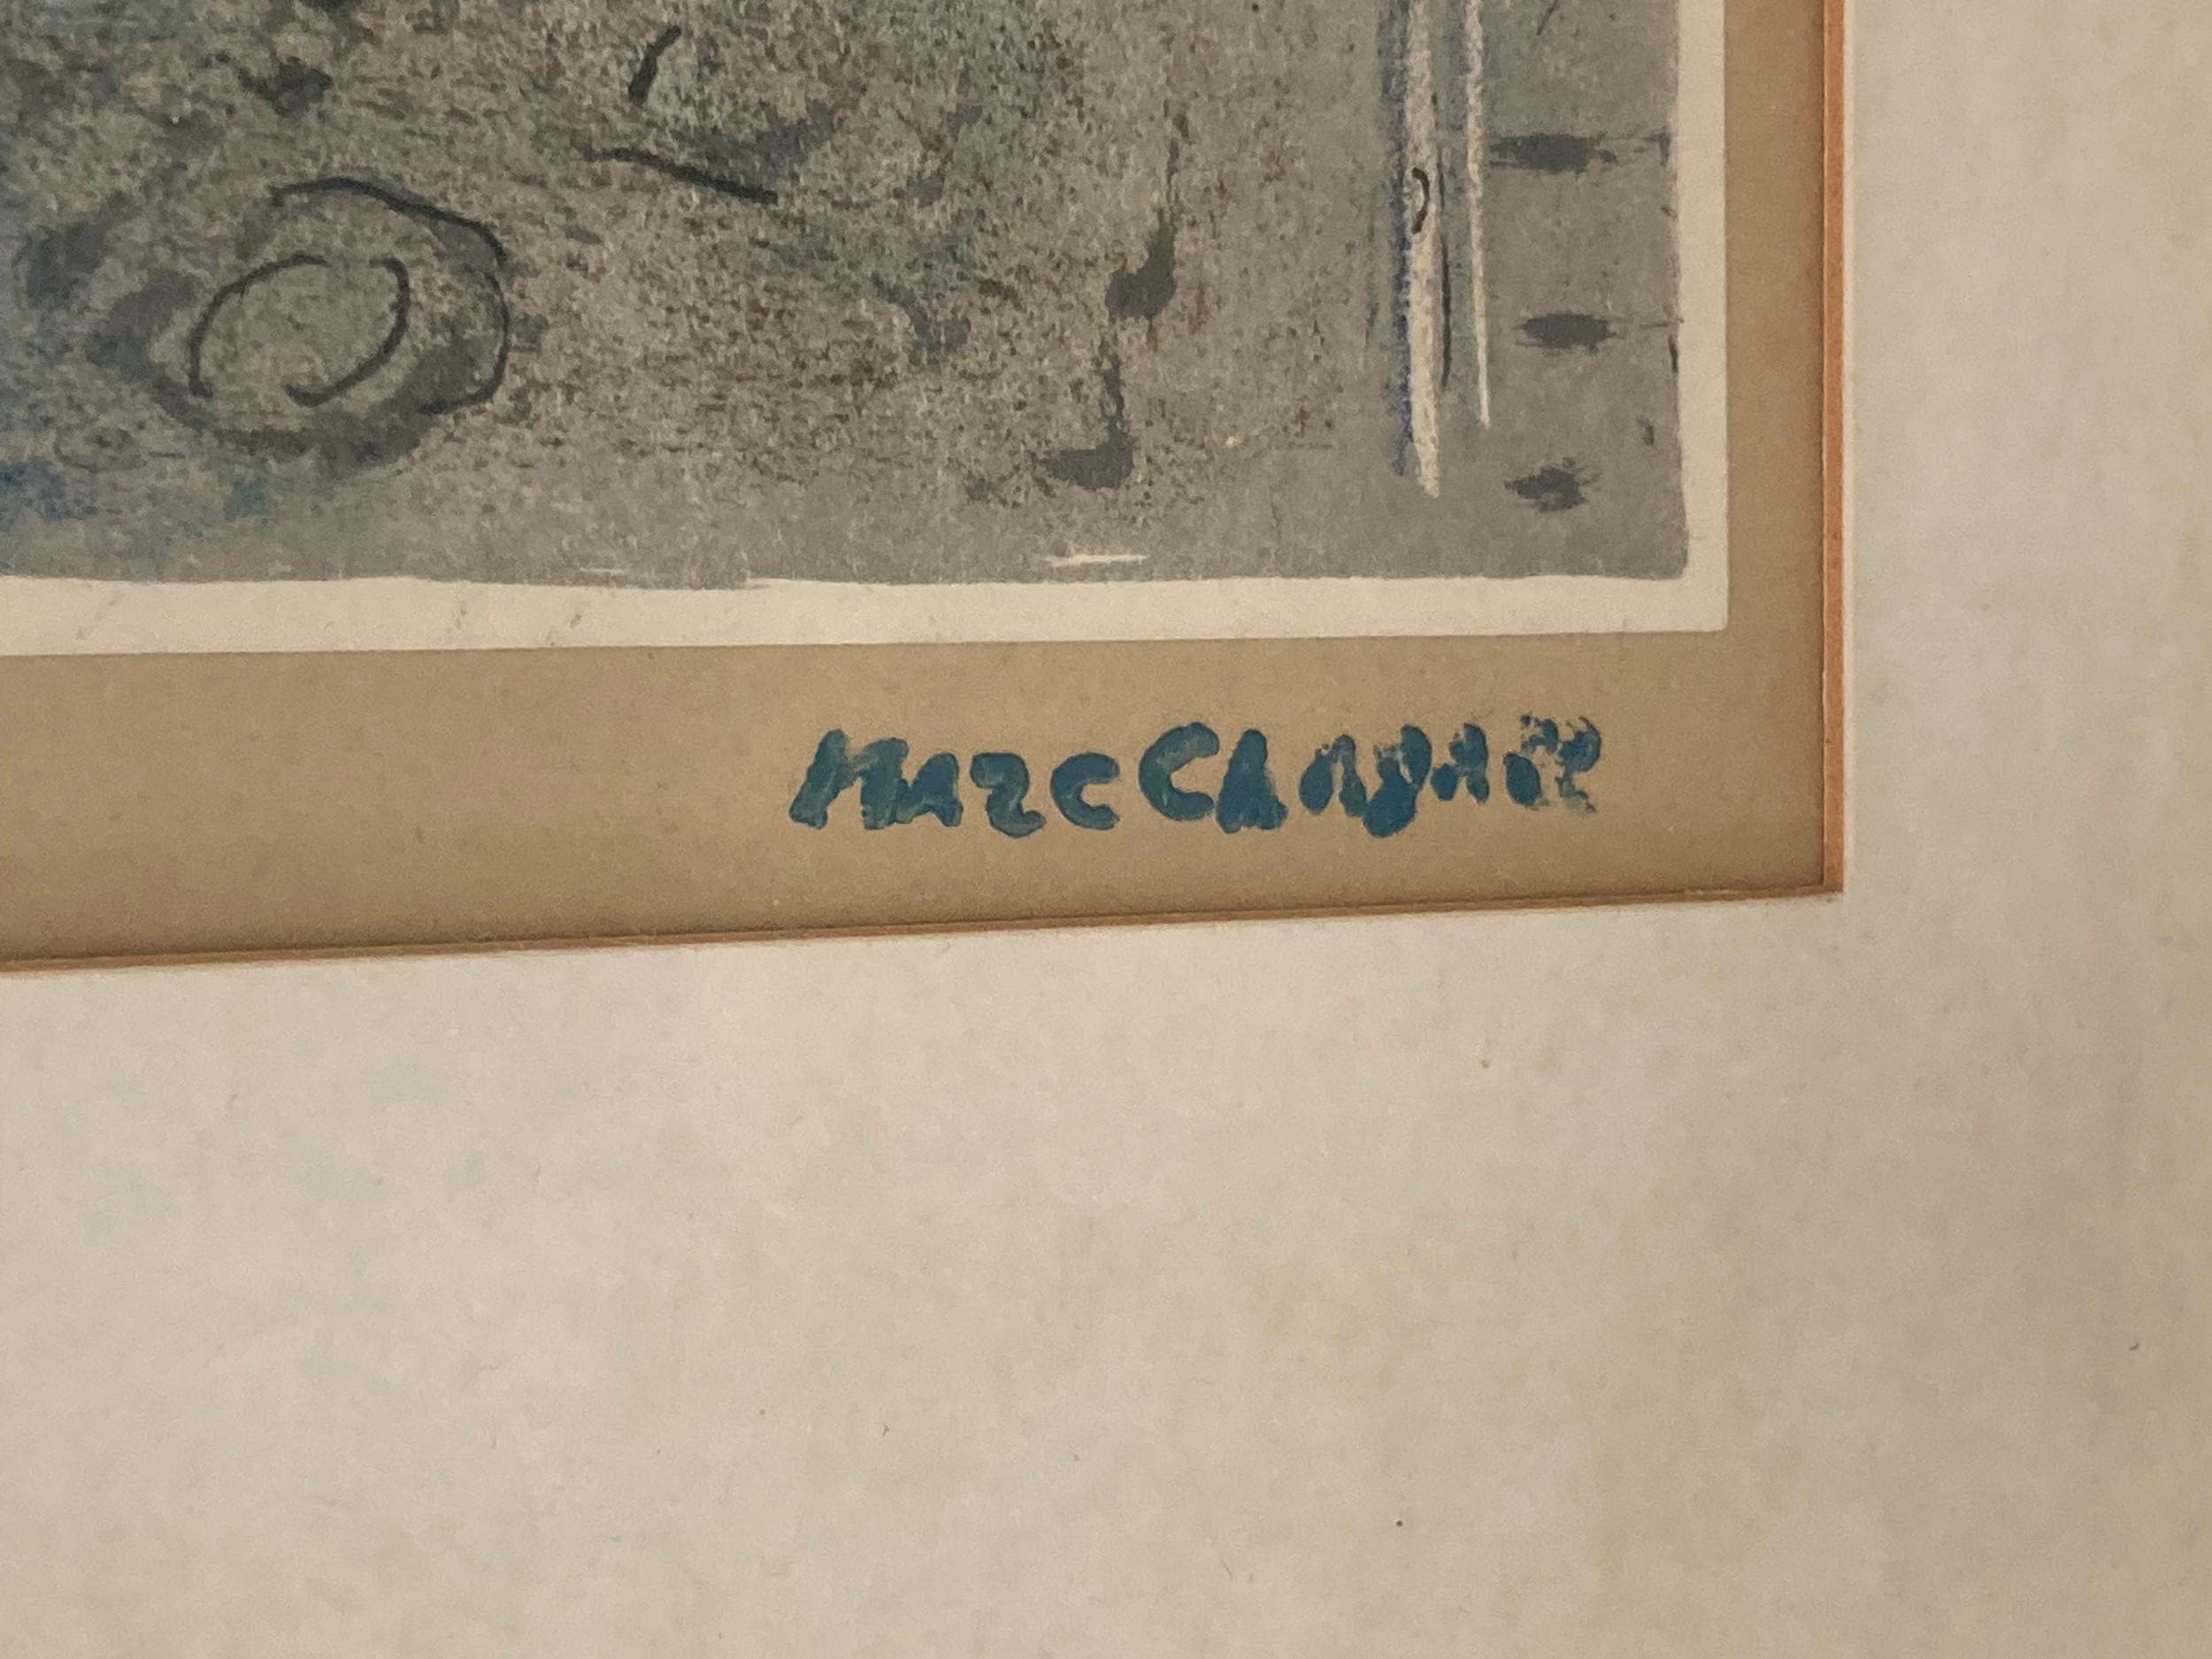 MARC CHAGALL 'Le dimanche', lithograph, pencil numbered 6/200, 37cm x 28cm, framed. - Image 2 of 2